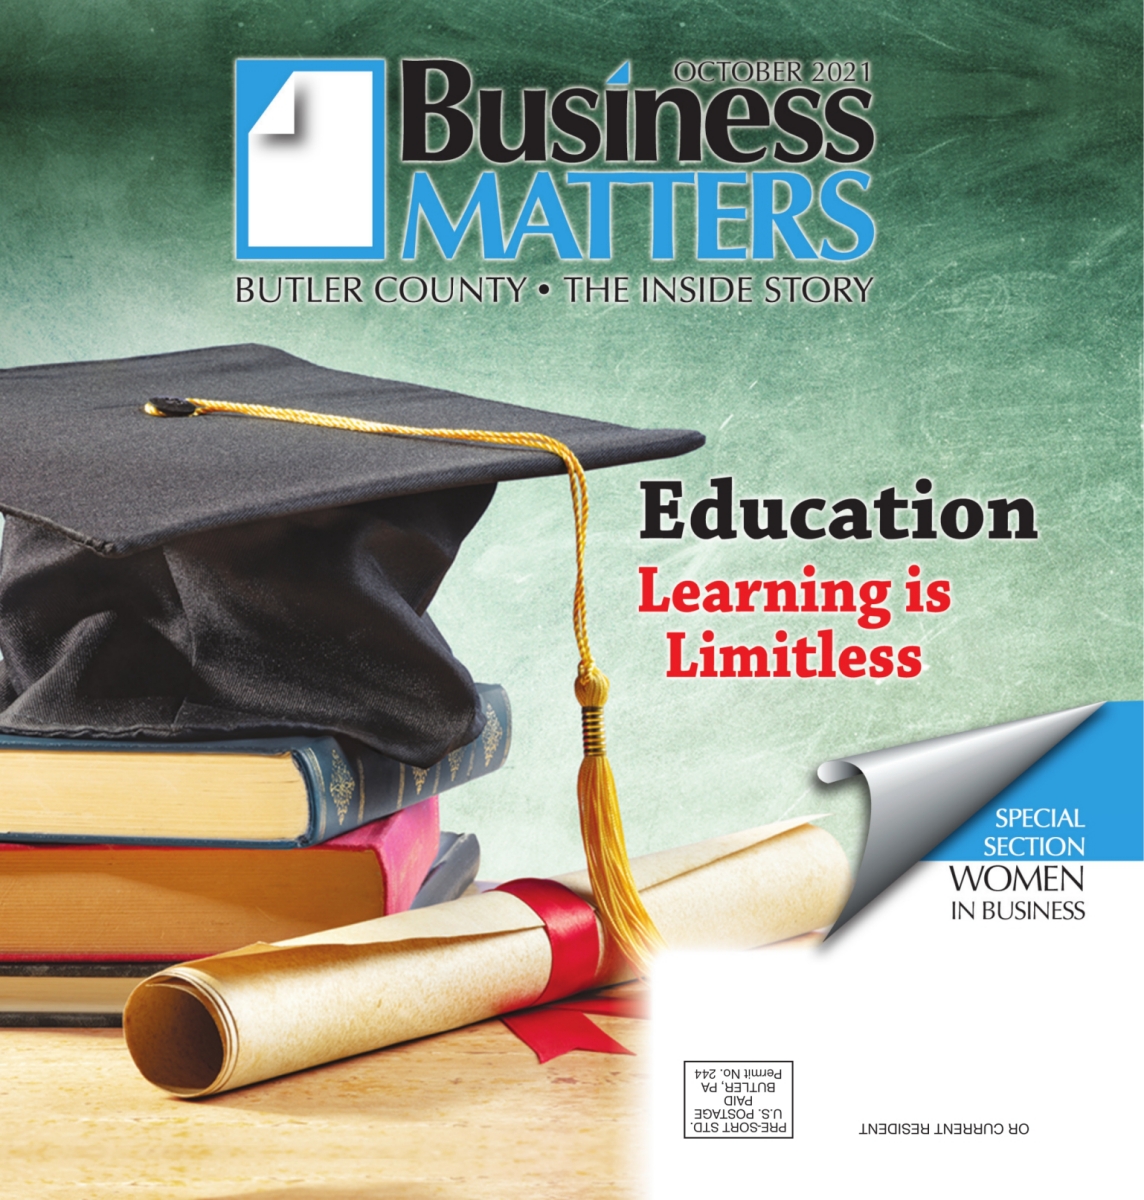 October 2021 - Education Learning in Limitless